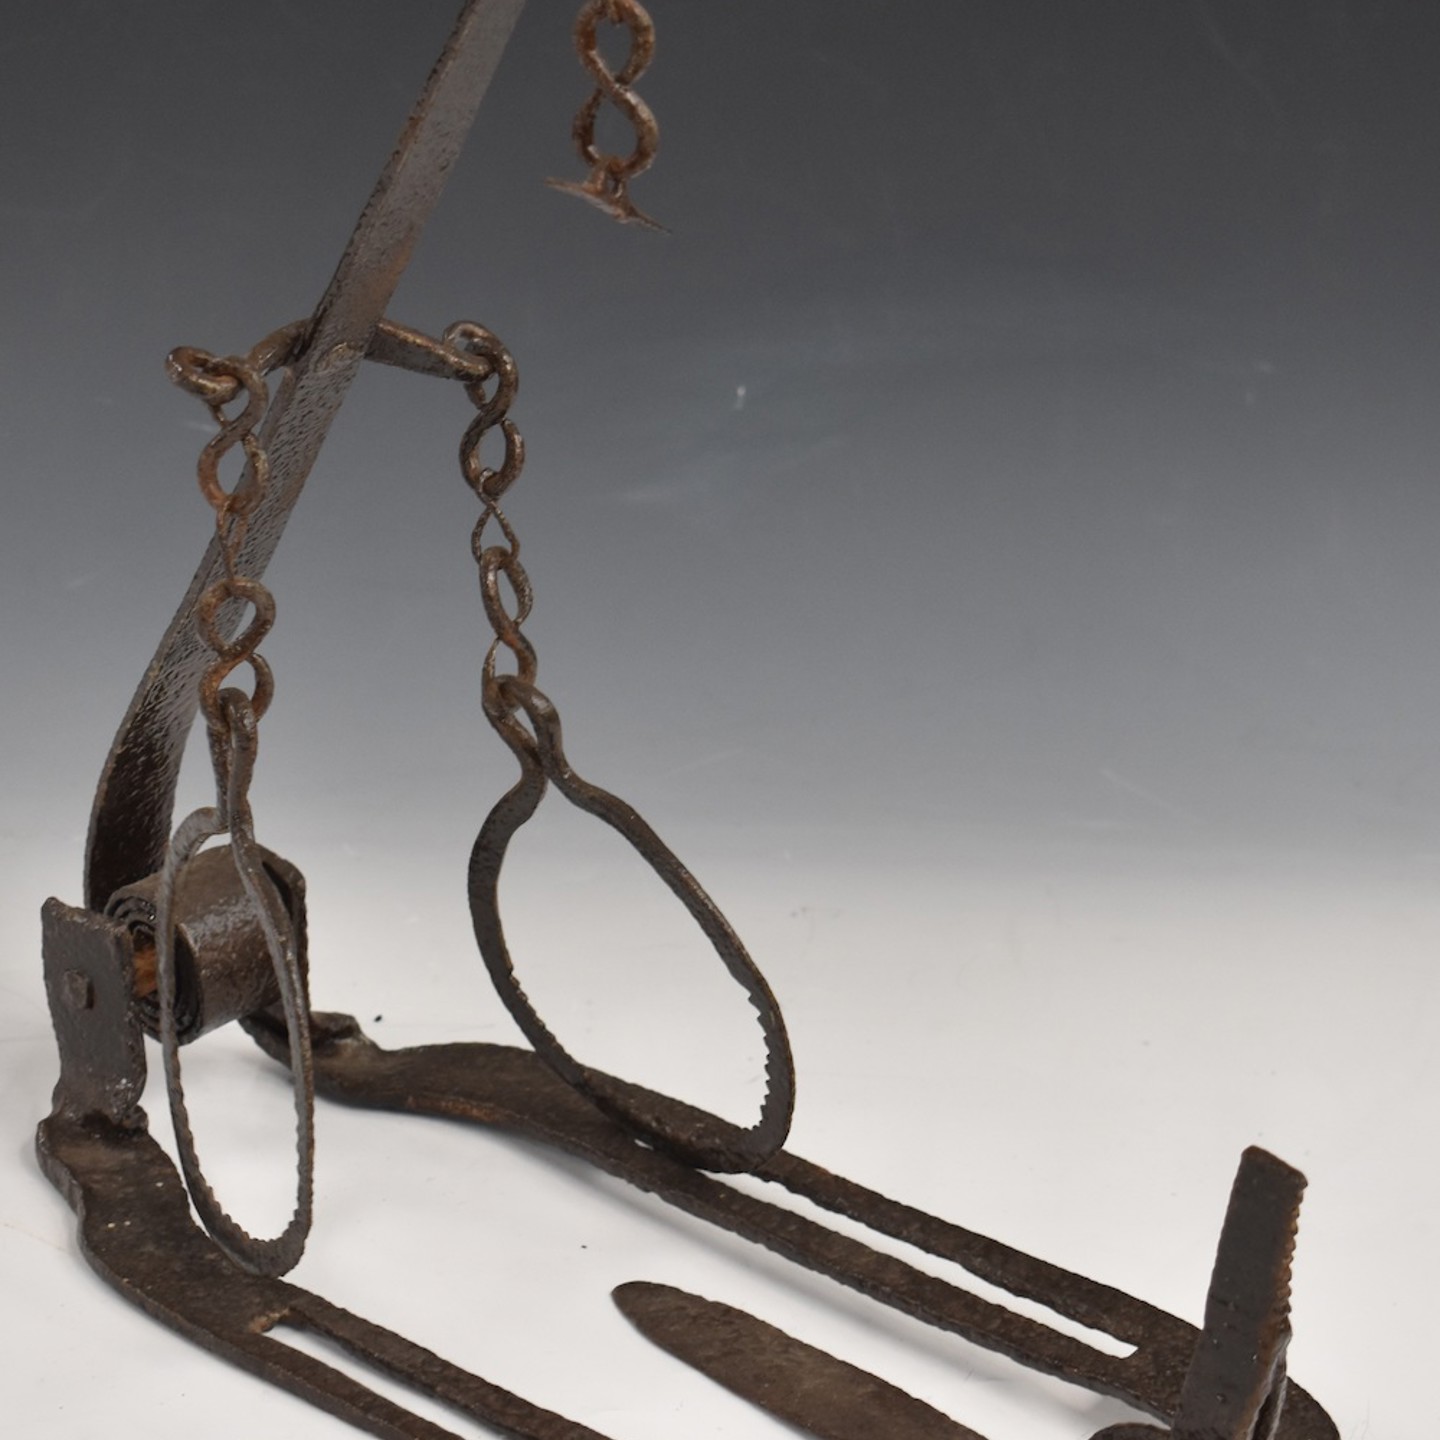 Unusual Vintage Wrought Iron Ring Rabbit Trap, 40 X 44 X 7Cm. Sold For £100